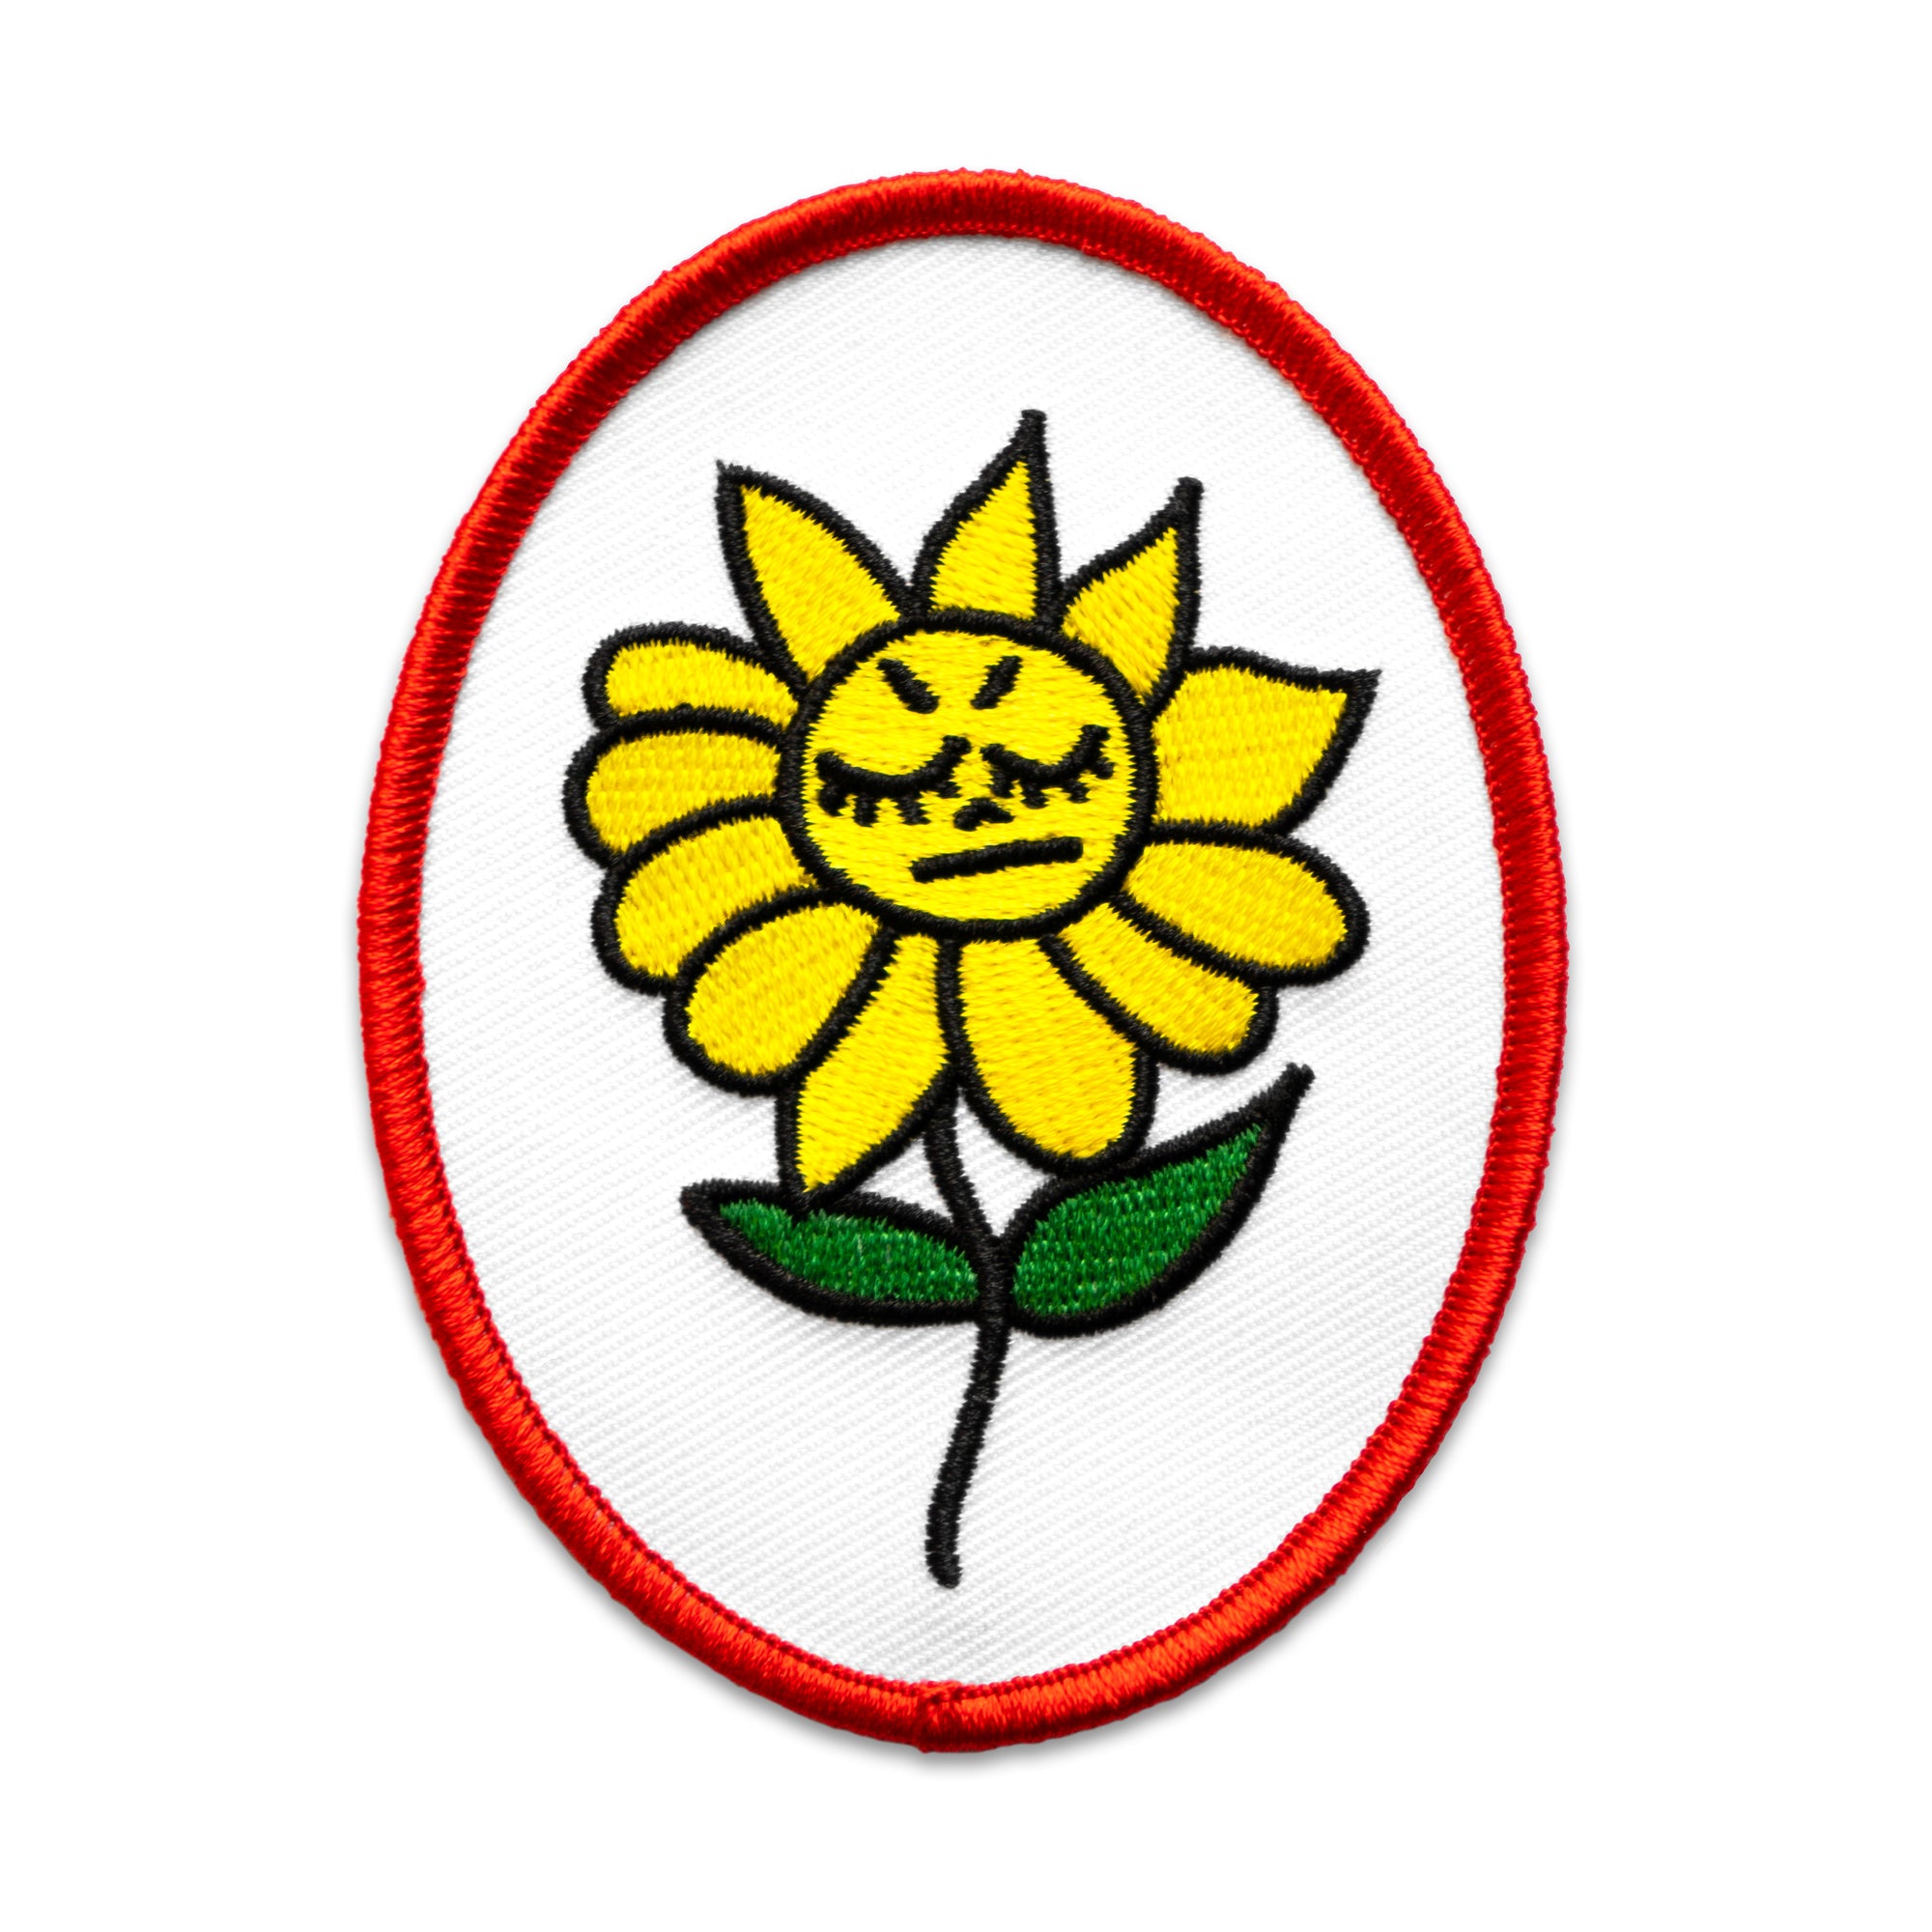 The "Angry Flower" Patch by "No Fun®.  The patch is white, with a red boarder, and is in the shape of an oval.  There is a yellow cartoon flower in the center of the patch.  It has an angry face and two green leaves.